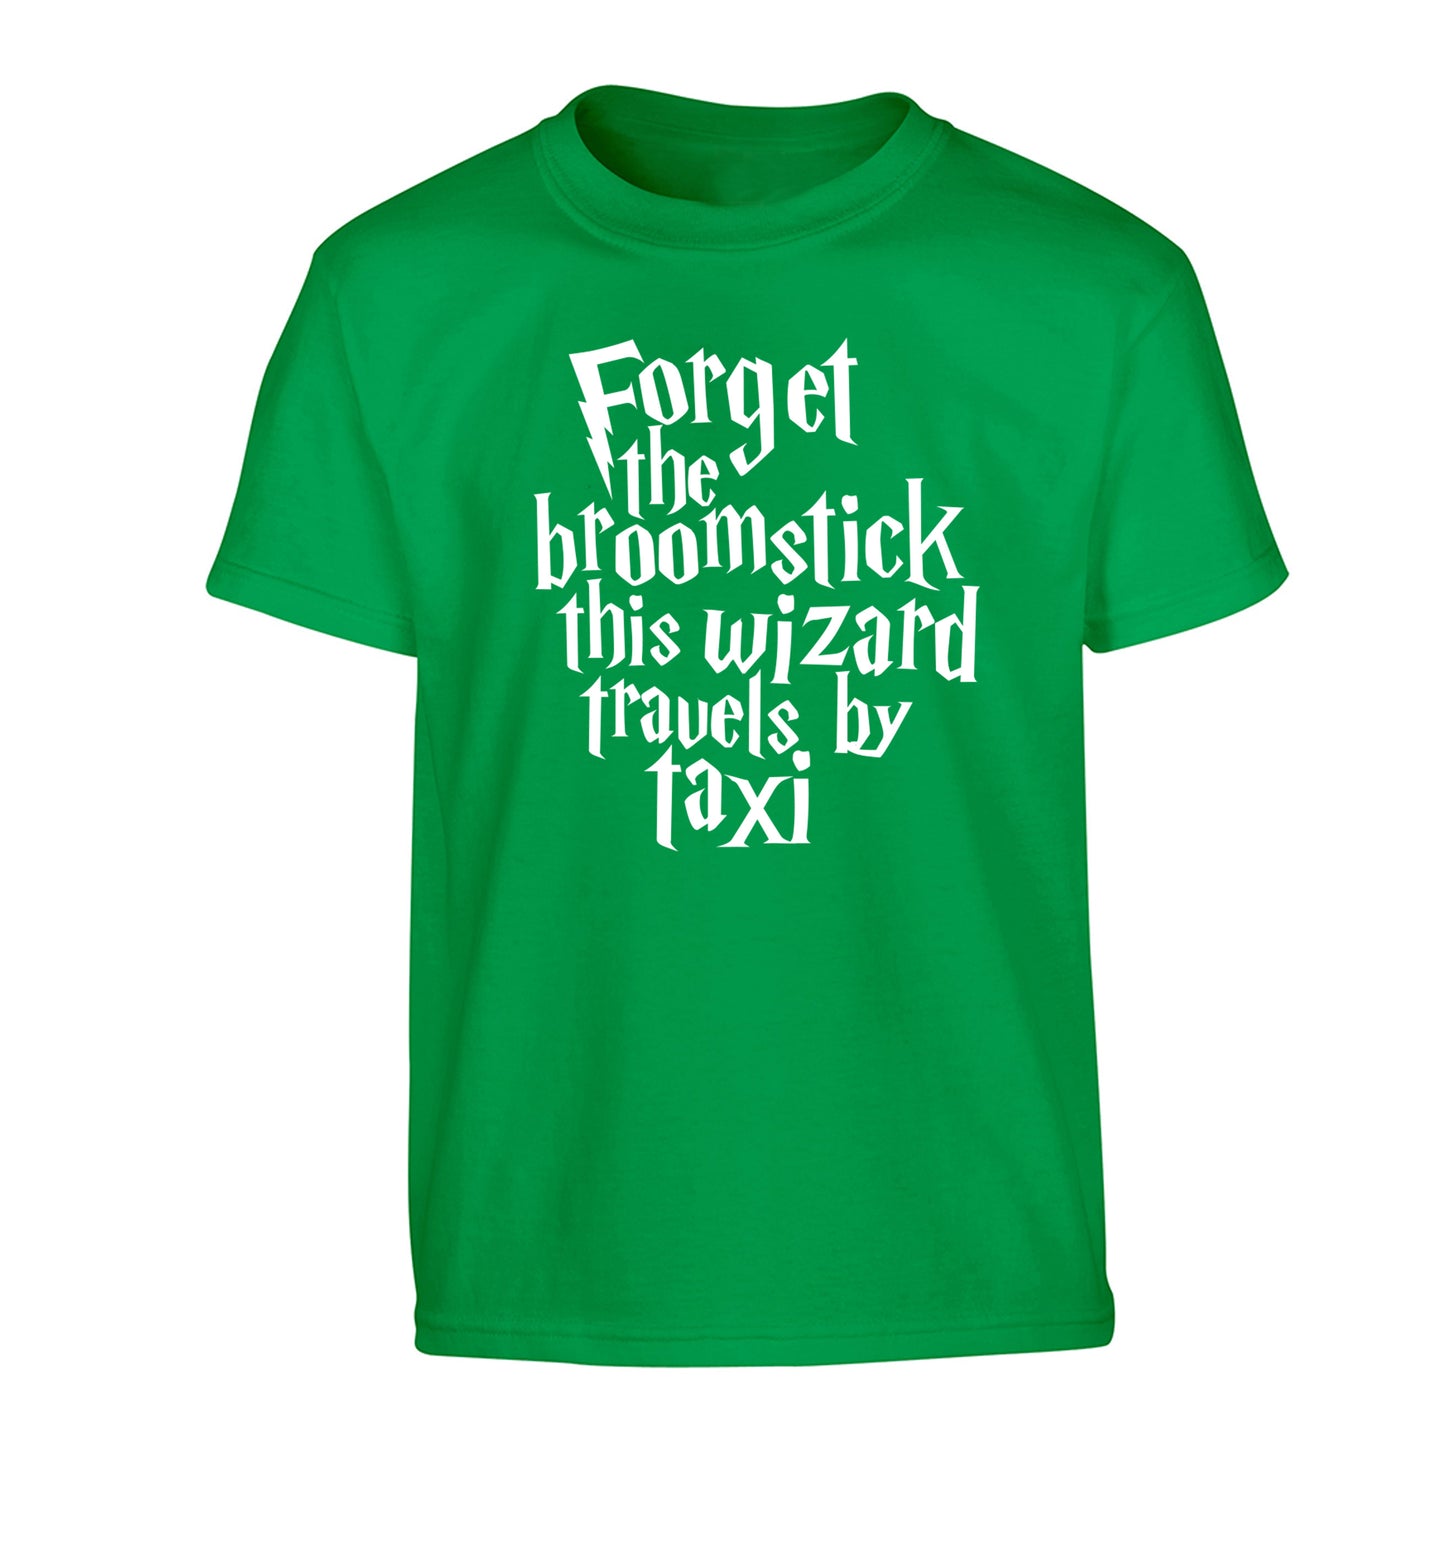 Forget the broomstick this wizard travels by taxi Children's green Tshirt 12-14 Years